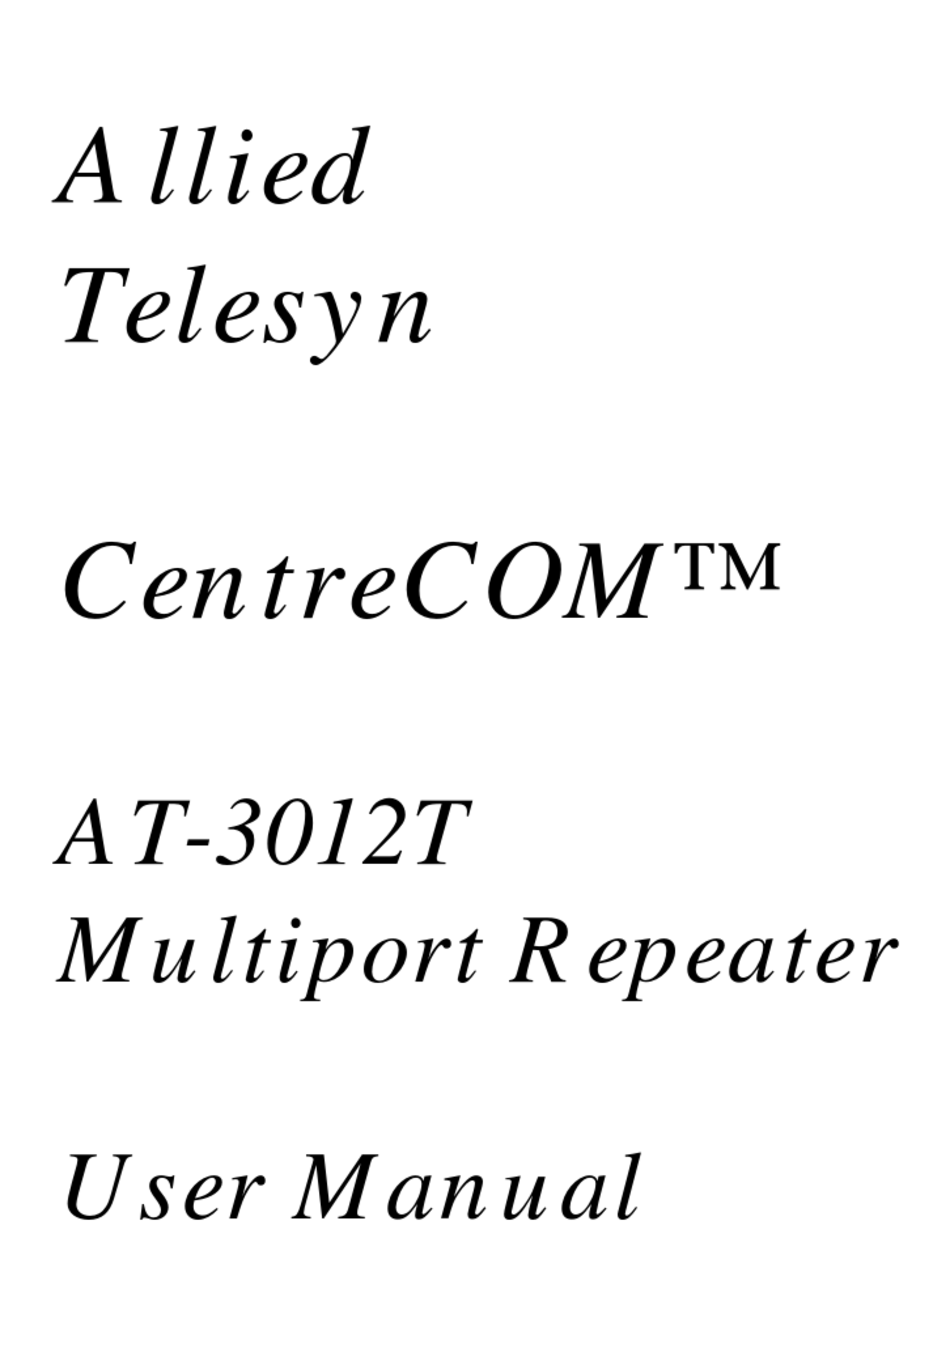 ALLIED TELESIS CENTRECOM AT-3012T USER MANUAL Pdf Download